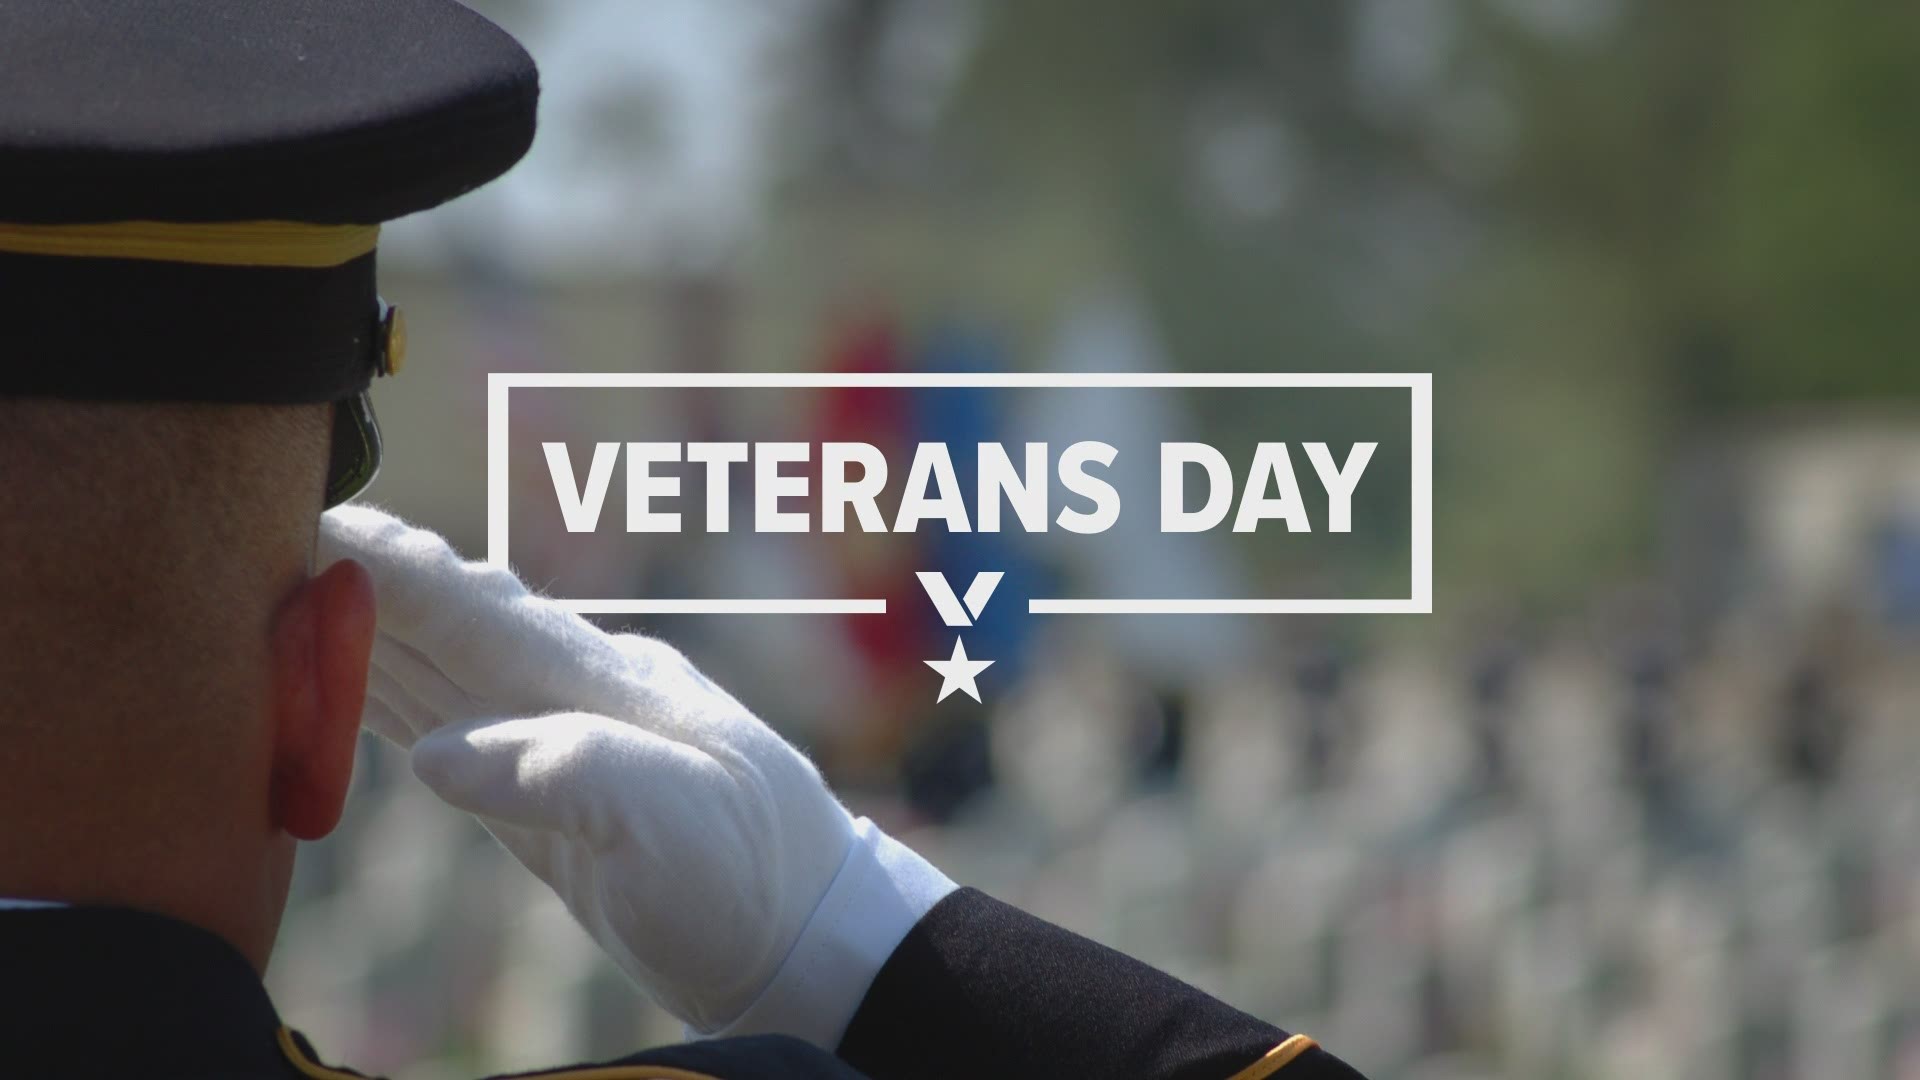 A look at some of the events happening today to honor veterans as well as where to find some deals and freebies.